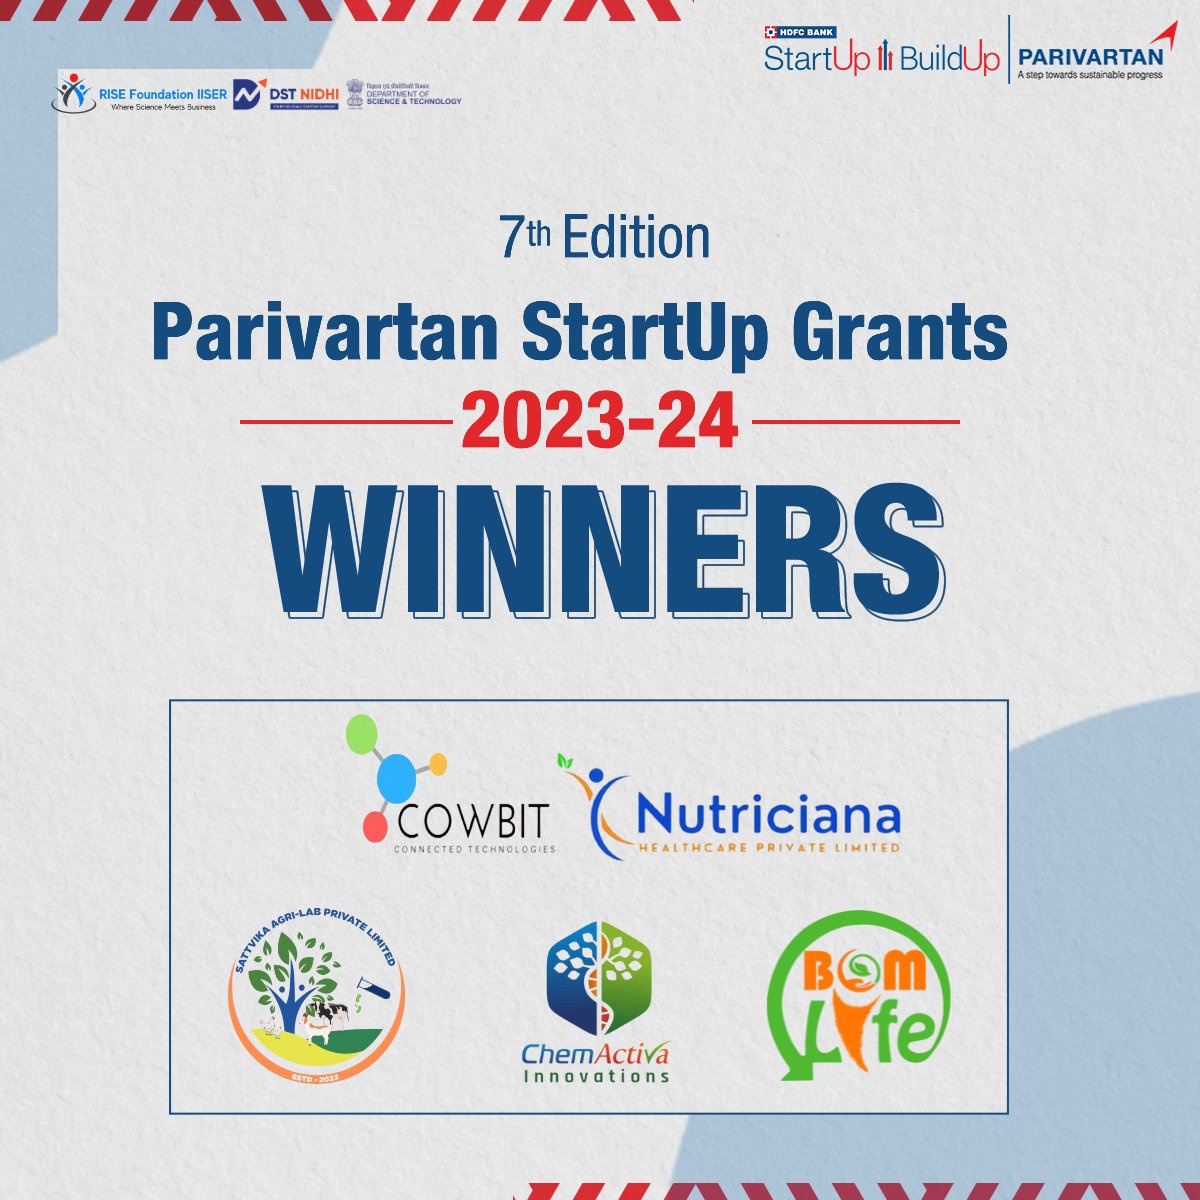 We are pleased to announce the winners of the @HDFC Bank - @Parivartan StartUp Grants 2024. The program contributes towards social development in India by supporting emerging innovative startups working in the social space via incubators.
#HDFCBank #SocialImpact #CSR #Parivartan